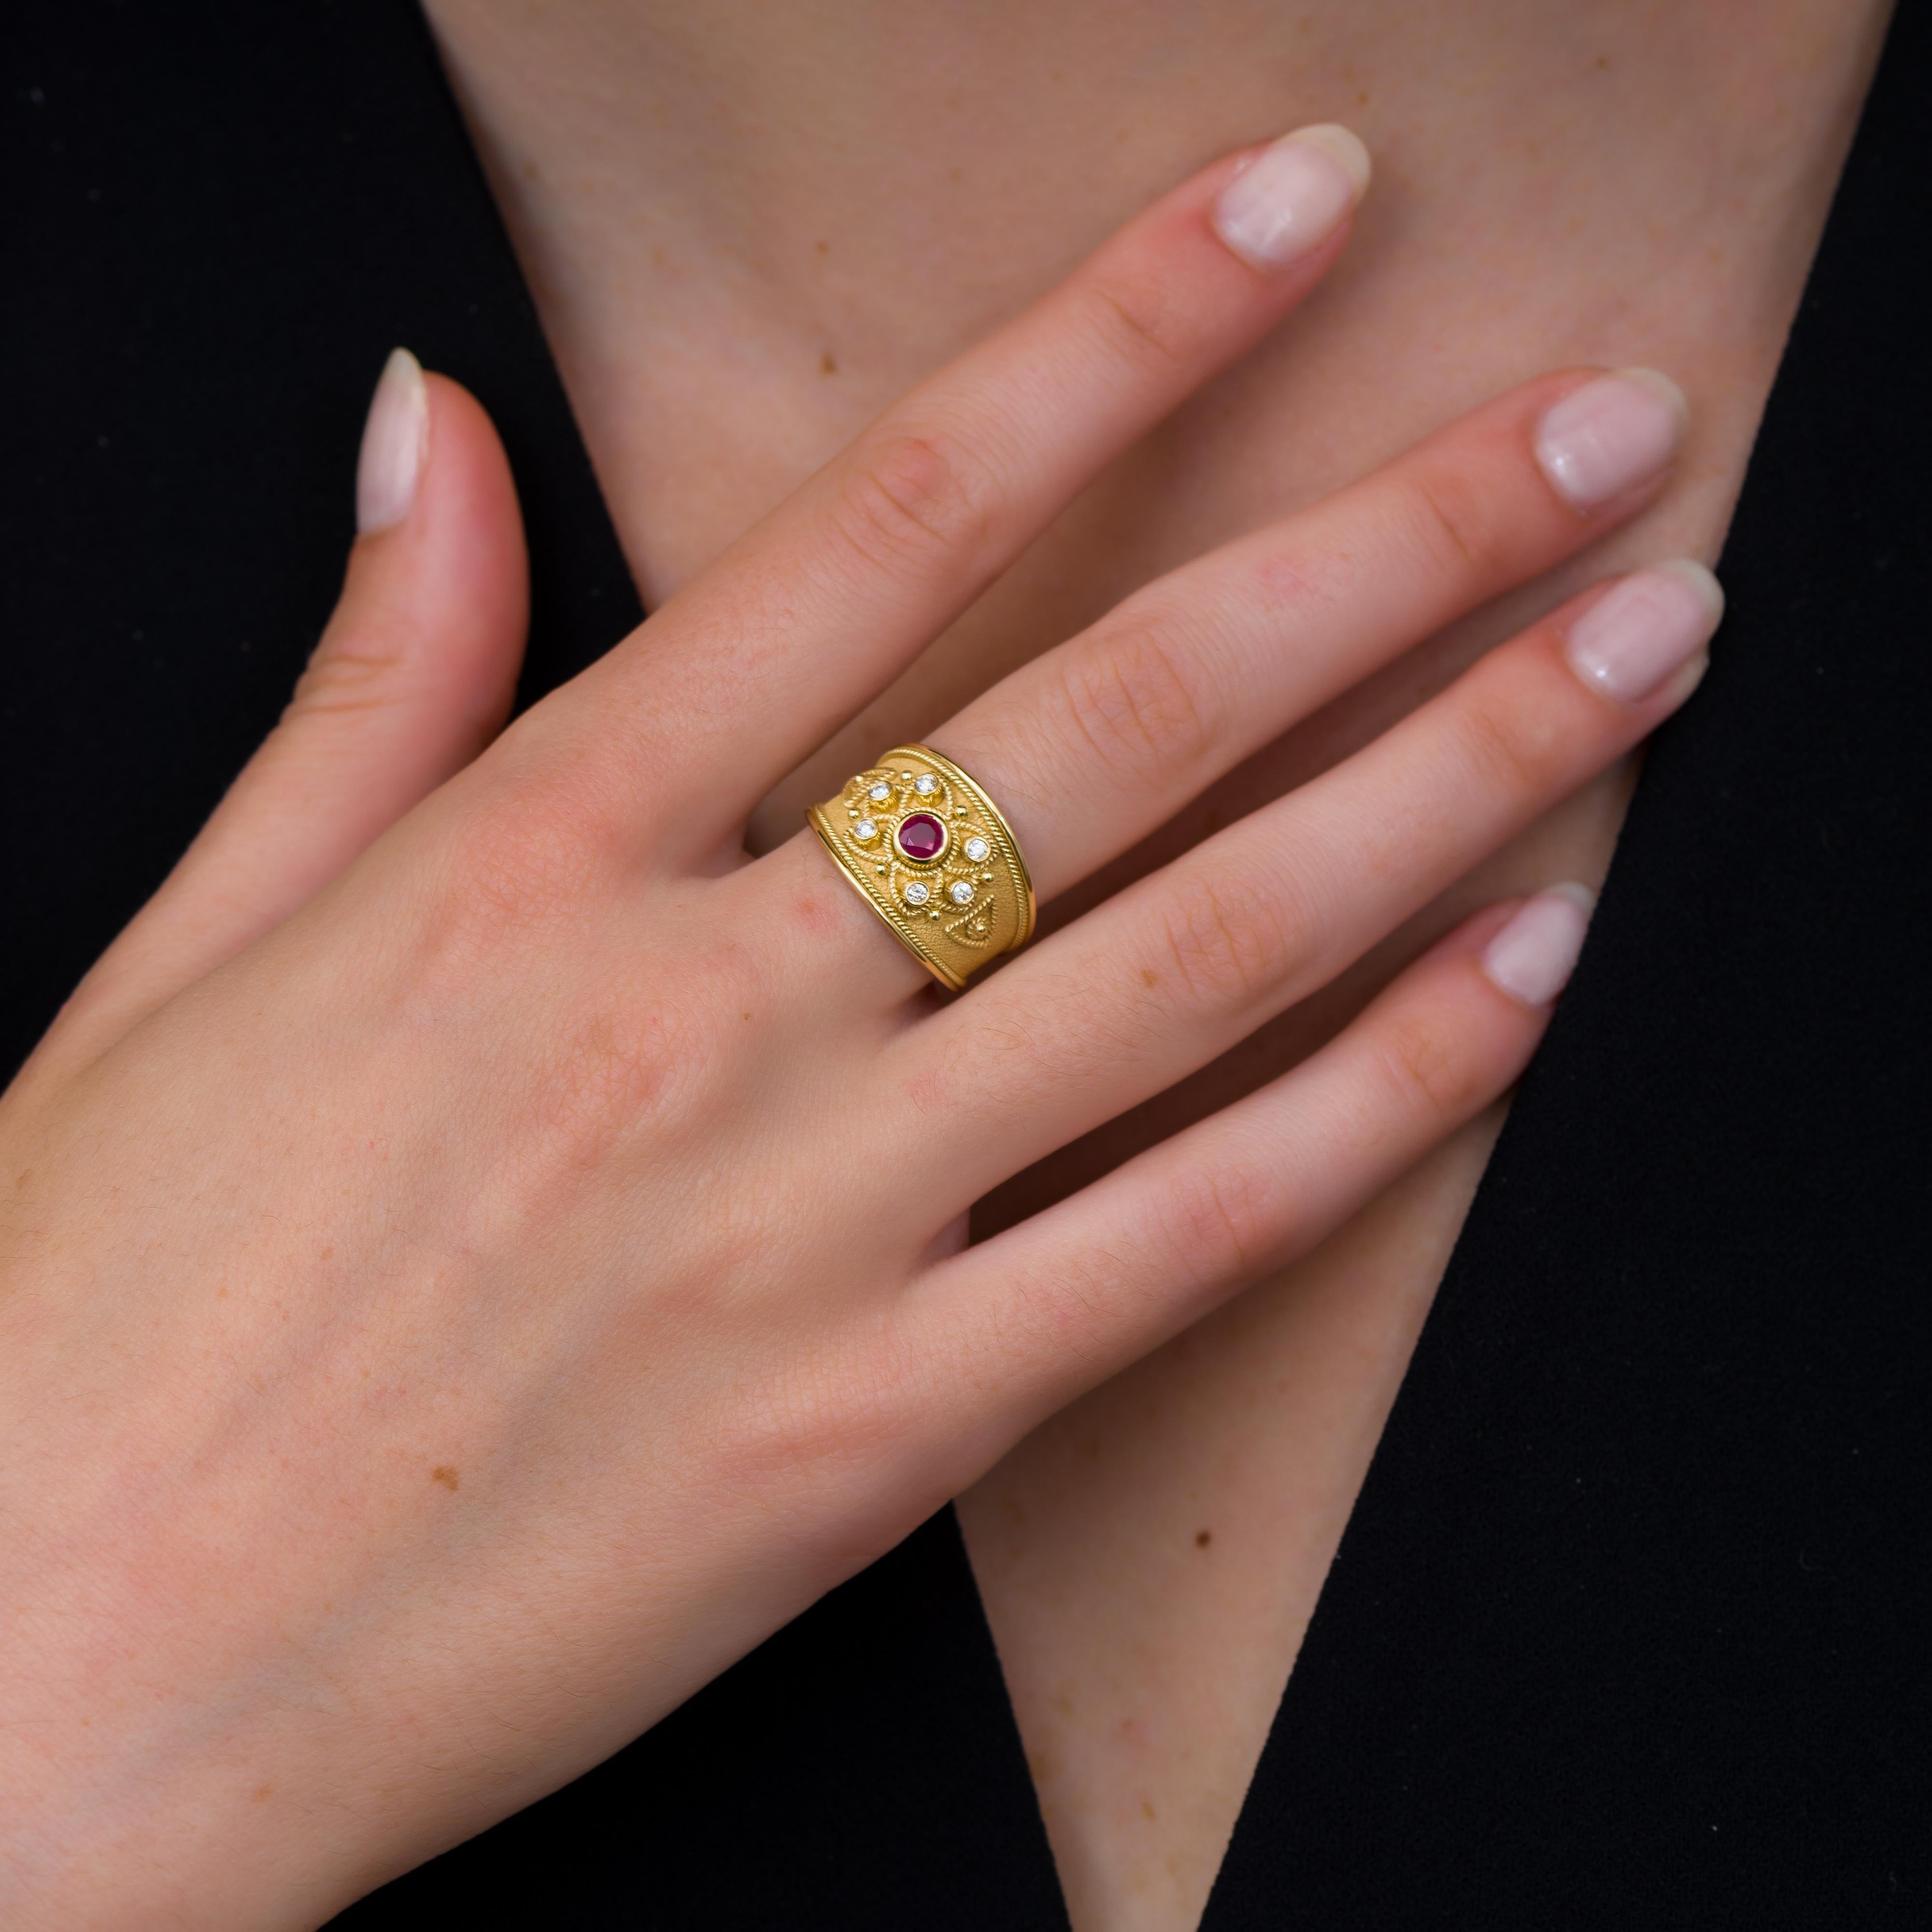 Behold our exquisite gold ring, where a pink-red ruby takes center stage, encircled by glistening diamonds. Adorned with intricate golden details, it's a masterpiece of sophistication and luxury, capturing the essence of timeless elegance and